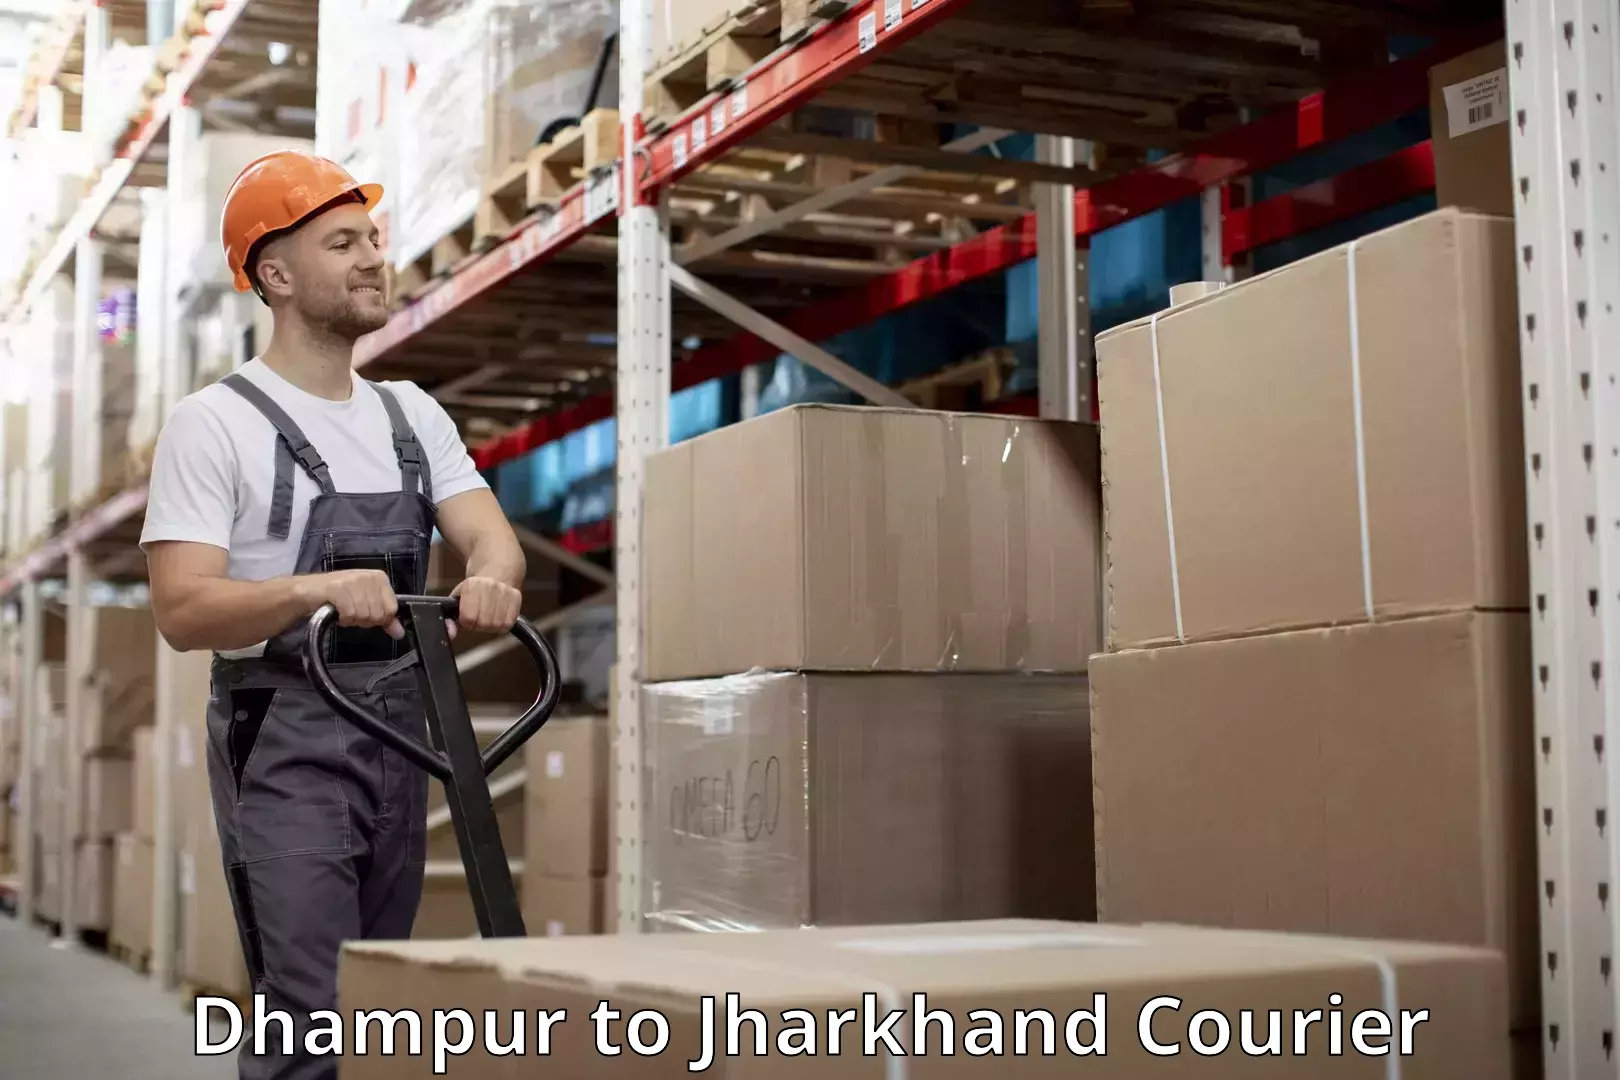 Luggage delivery app Dhampur to Jharkhand